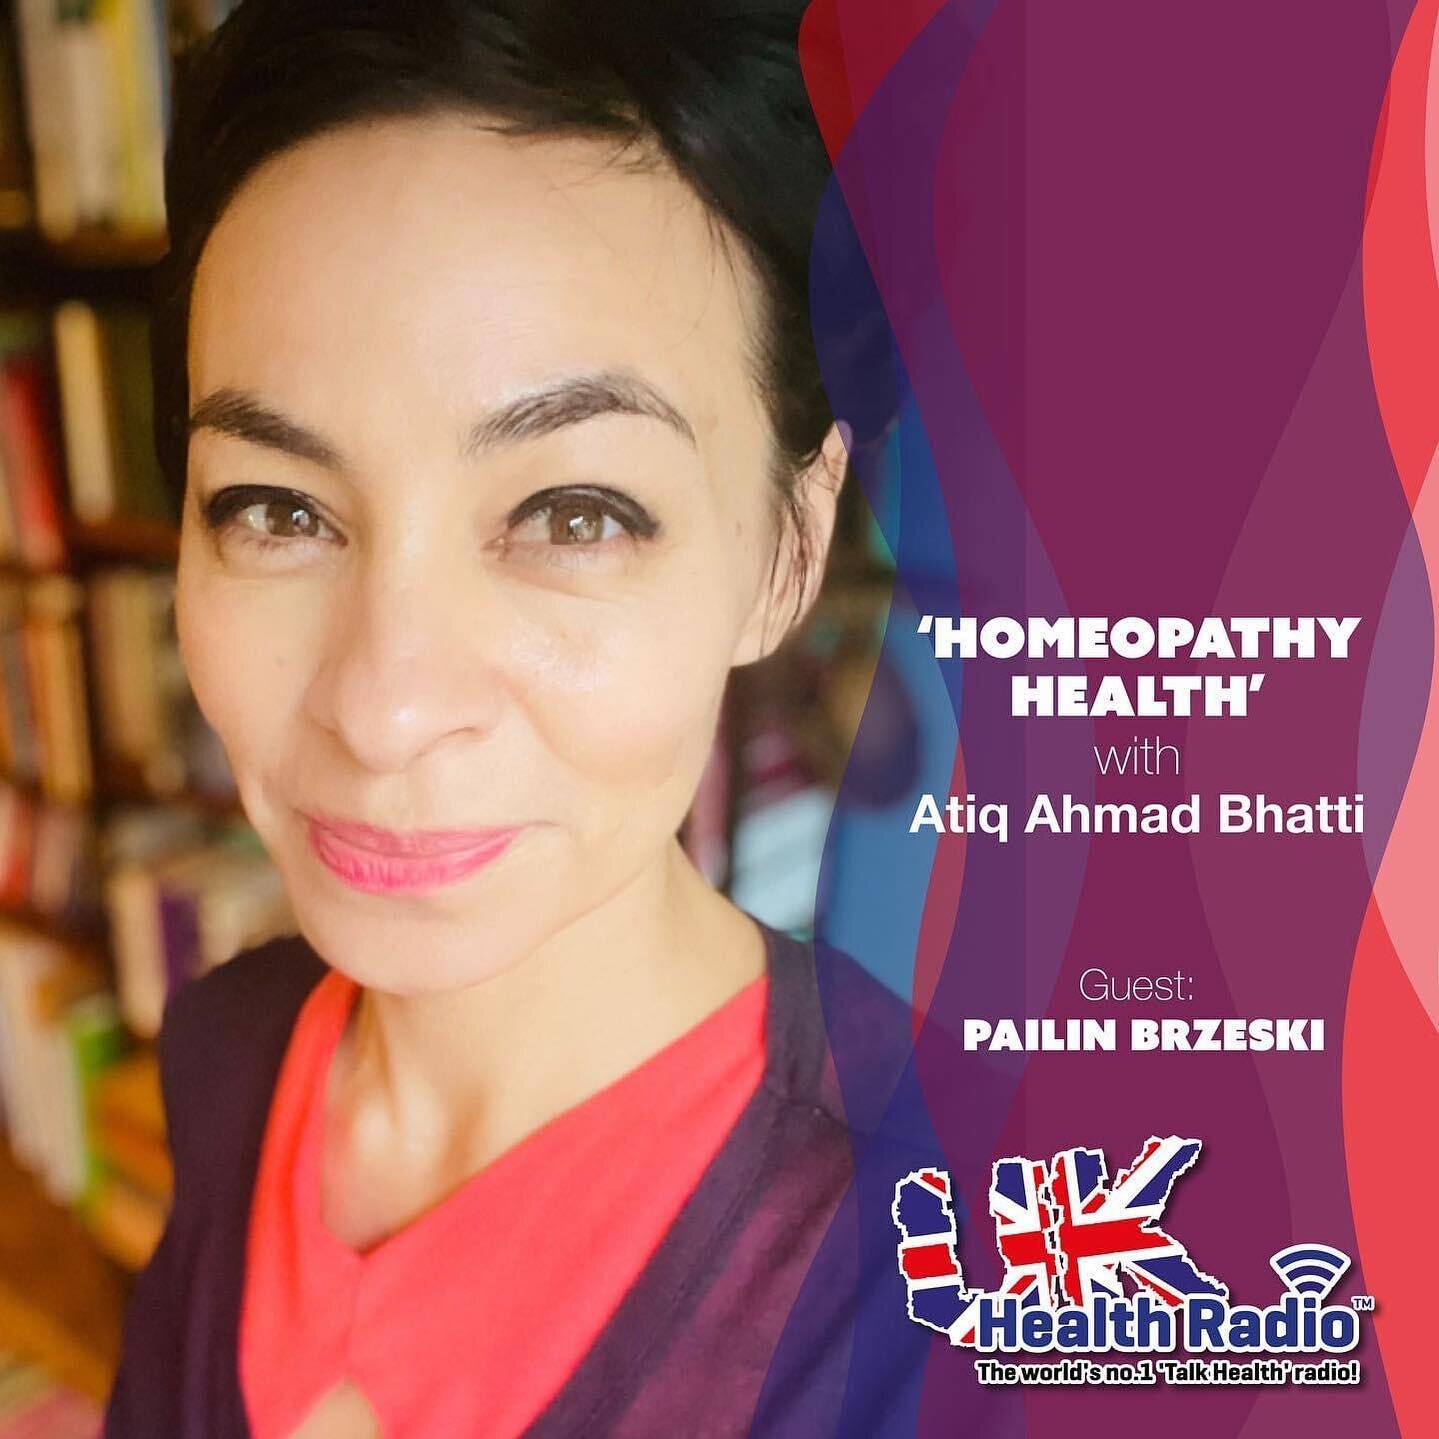 Thanking Like Treats Like Atiq Ahmad Bhatti for this conversation and introduction to my work on the Homeopathy Health Show Podcast for UK Health Radio

Here&rsquo;s the link to the show https://ukhealthradio.com/player/?ep=29567 
  #HomeopathyHealth